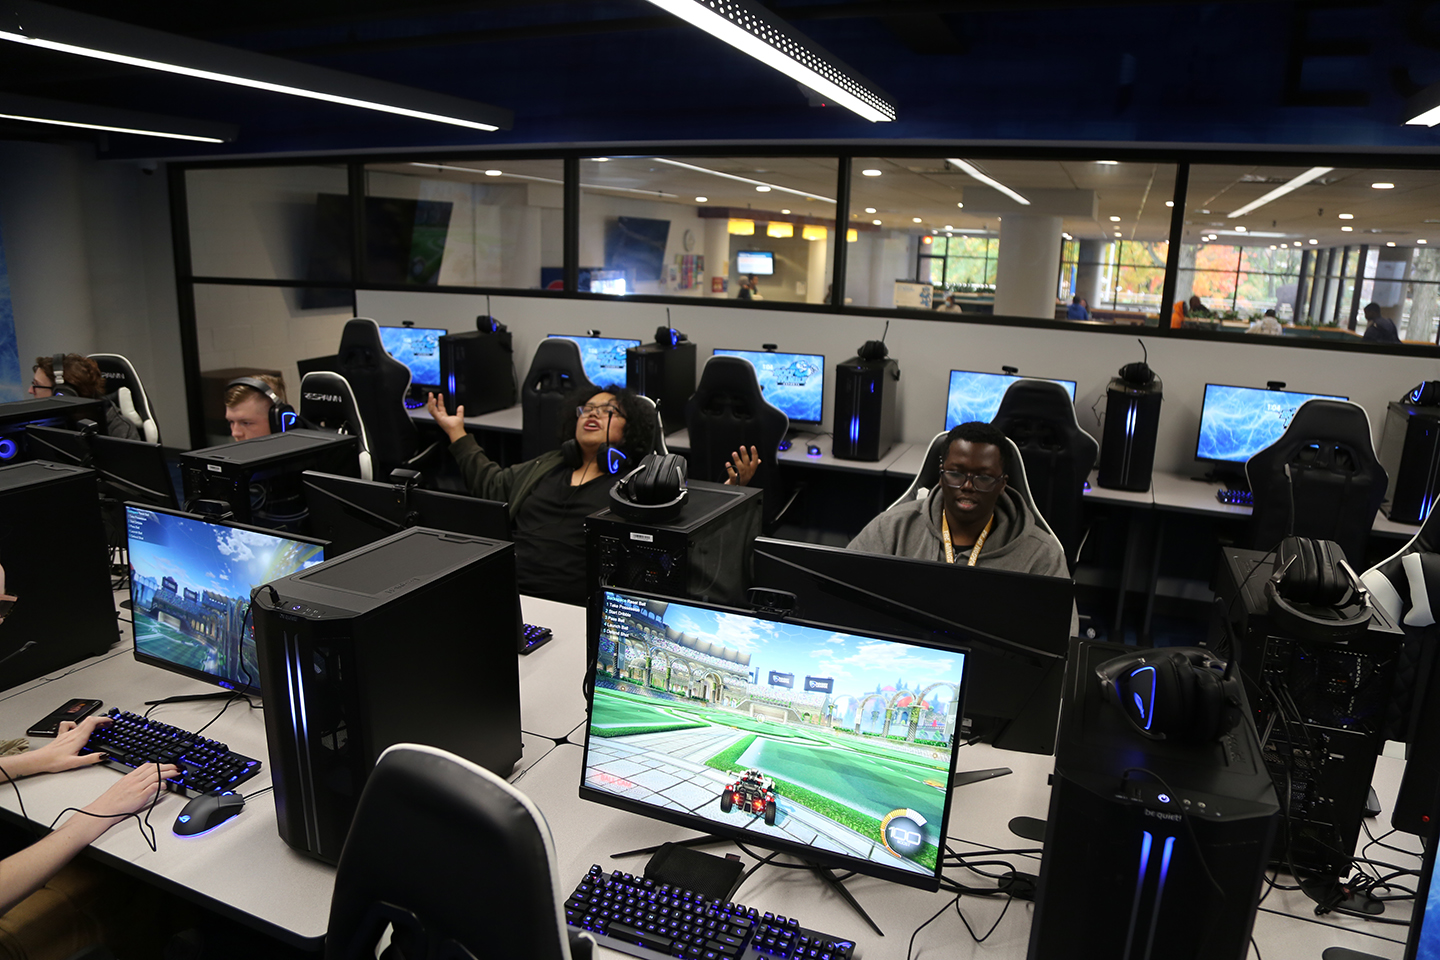 Students playing games in the University's Esports Center